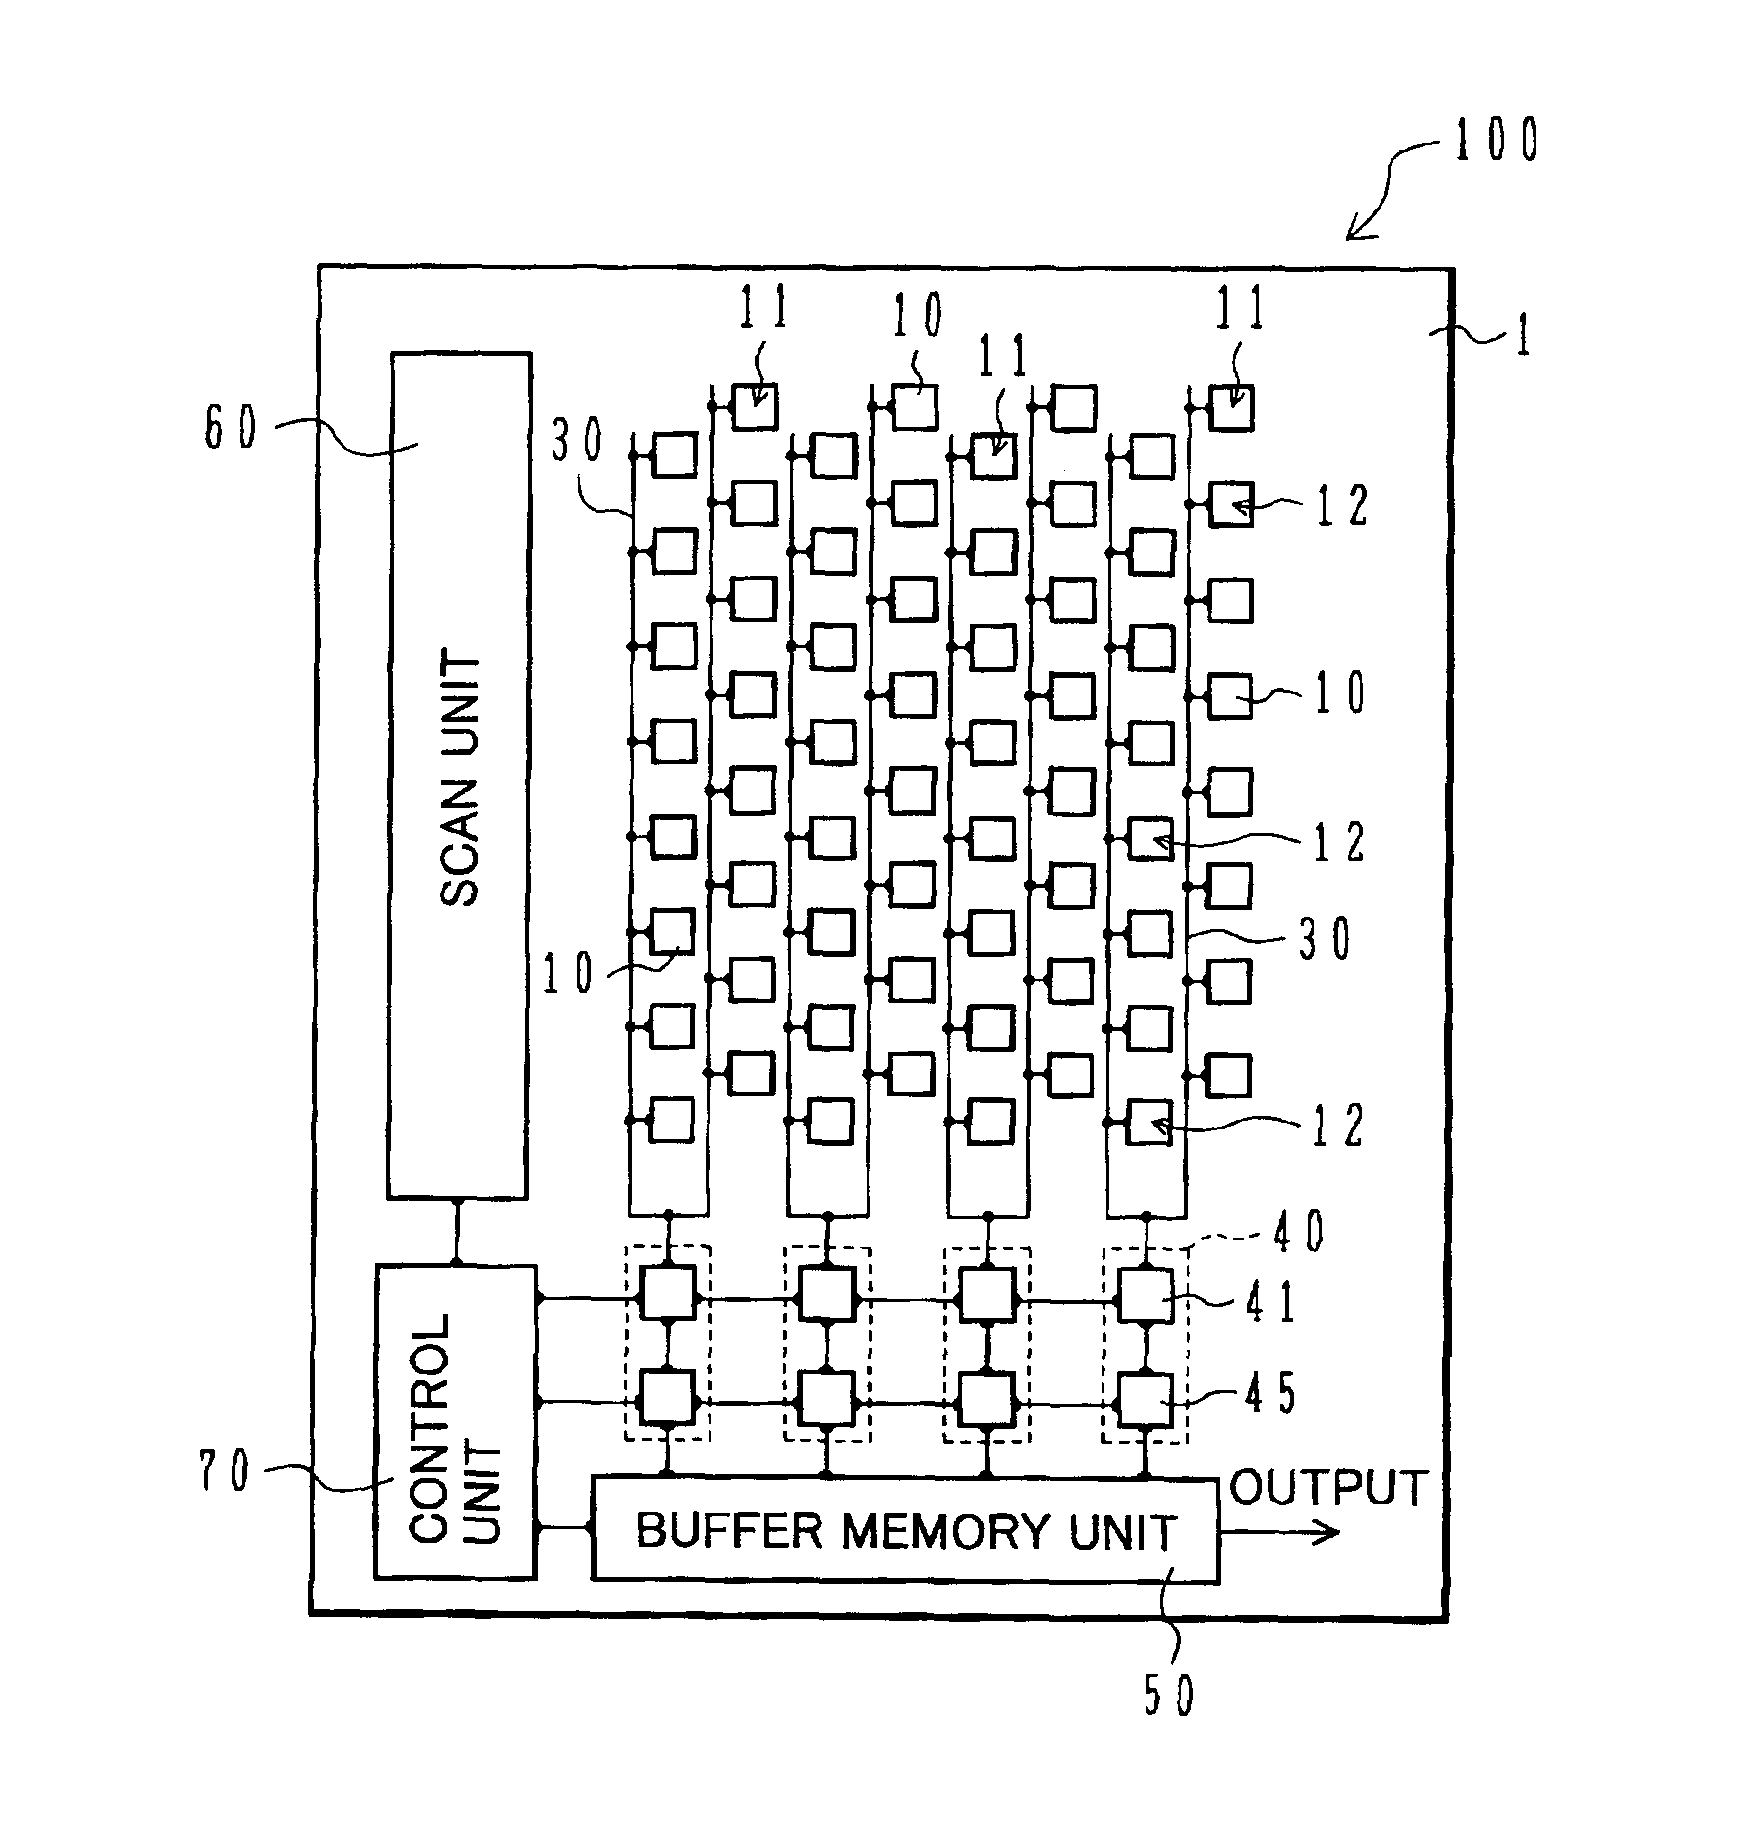 MOS type image pickup device having pixel interleaved array layout and one analog to digital conversion unit provided per each pair of adjacent photoelectric conversion columns